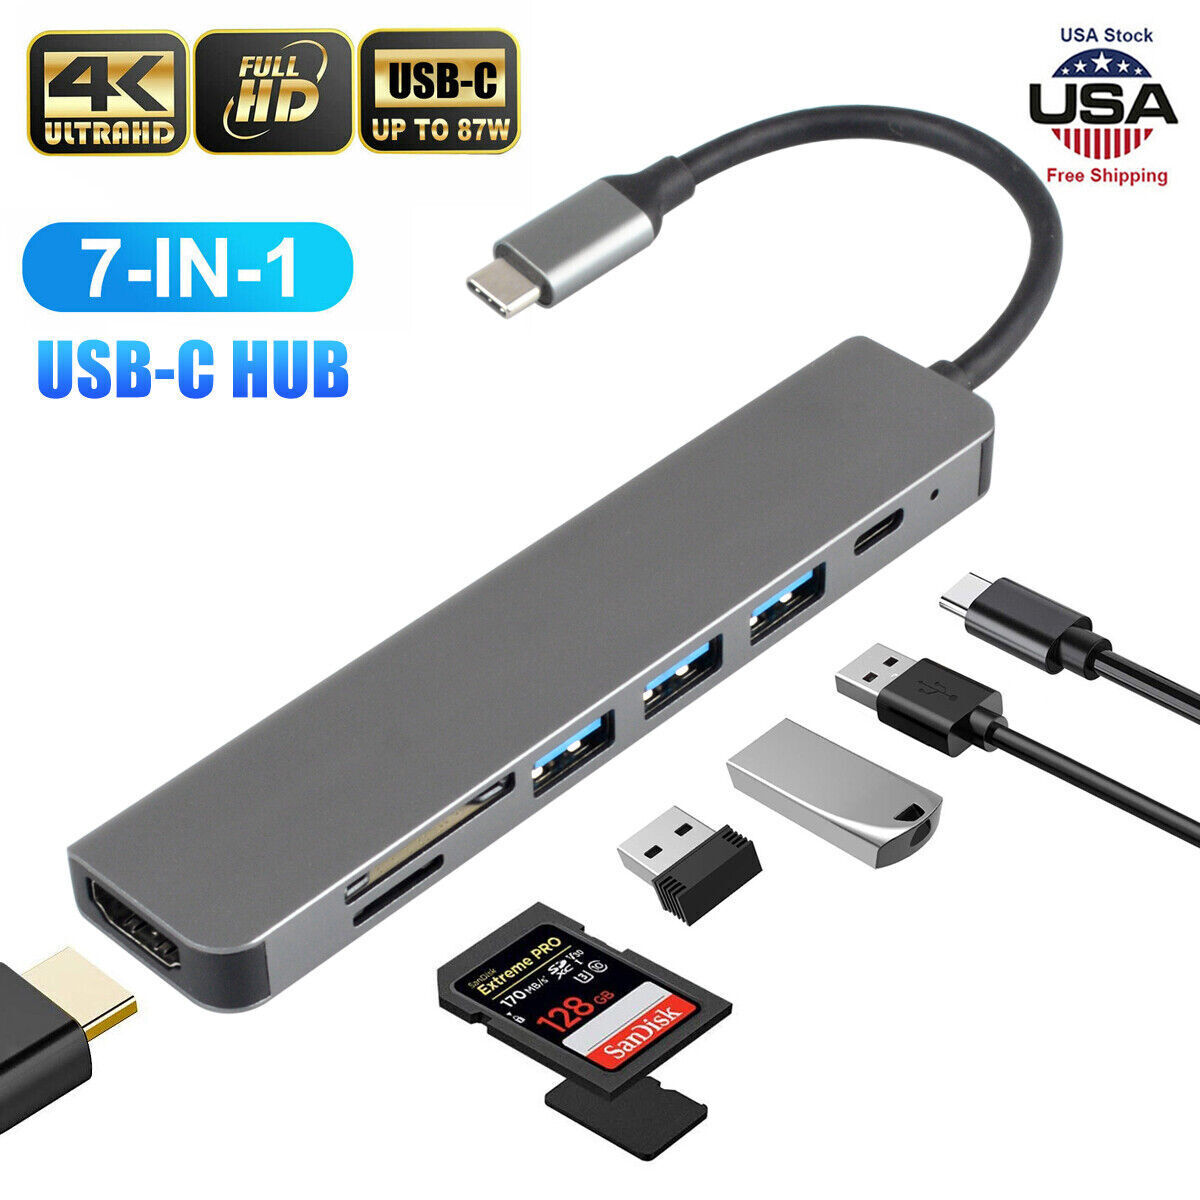 7in1 USB-C Type-C To USB 3.0 Multiport Hub Dock 4K HDMI for Mac – ASA College: Florida